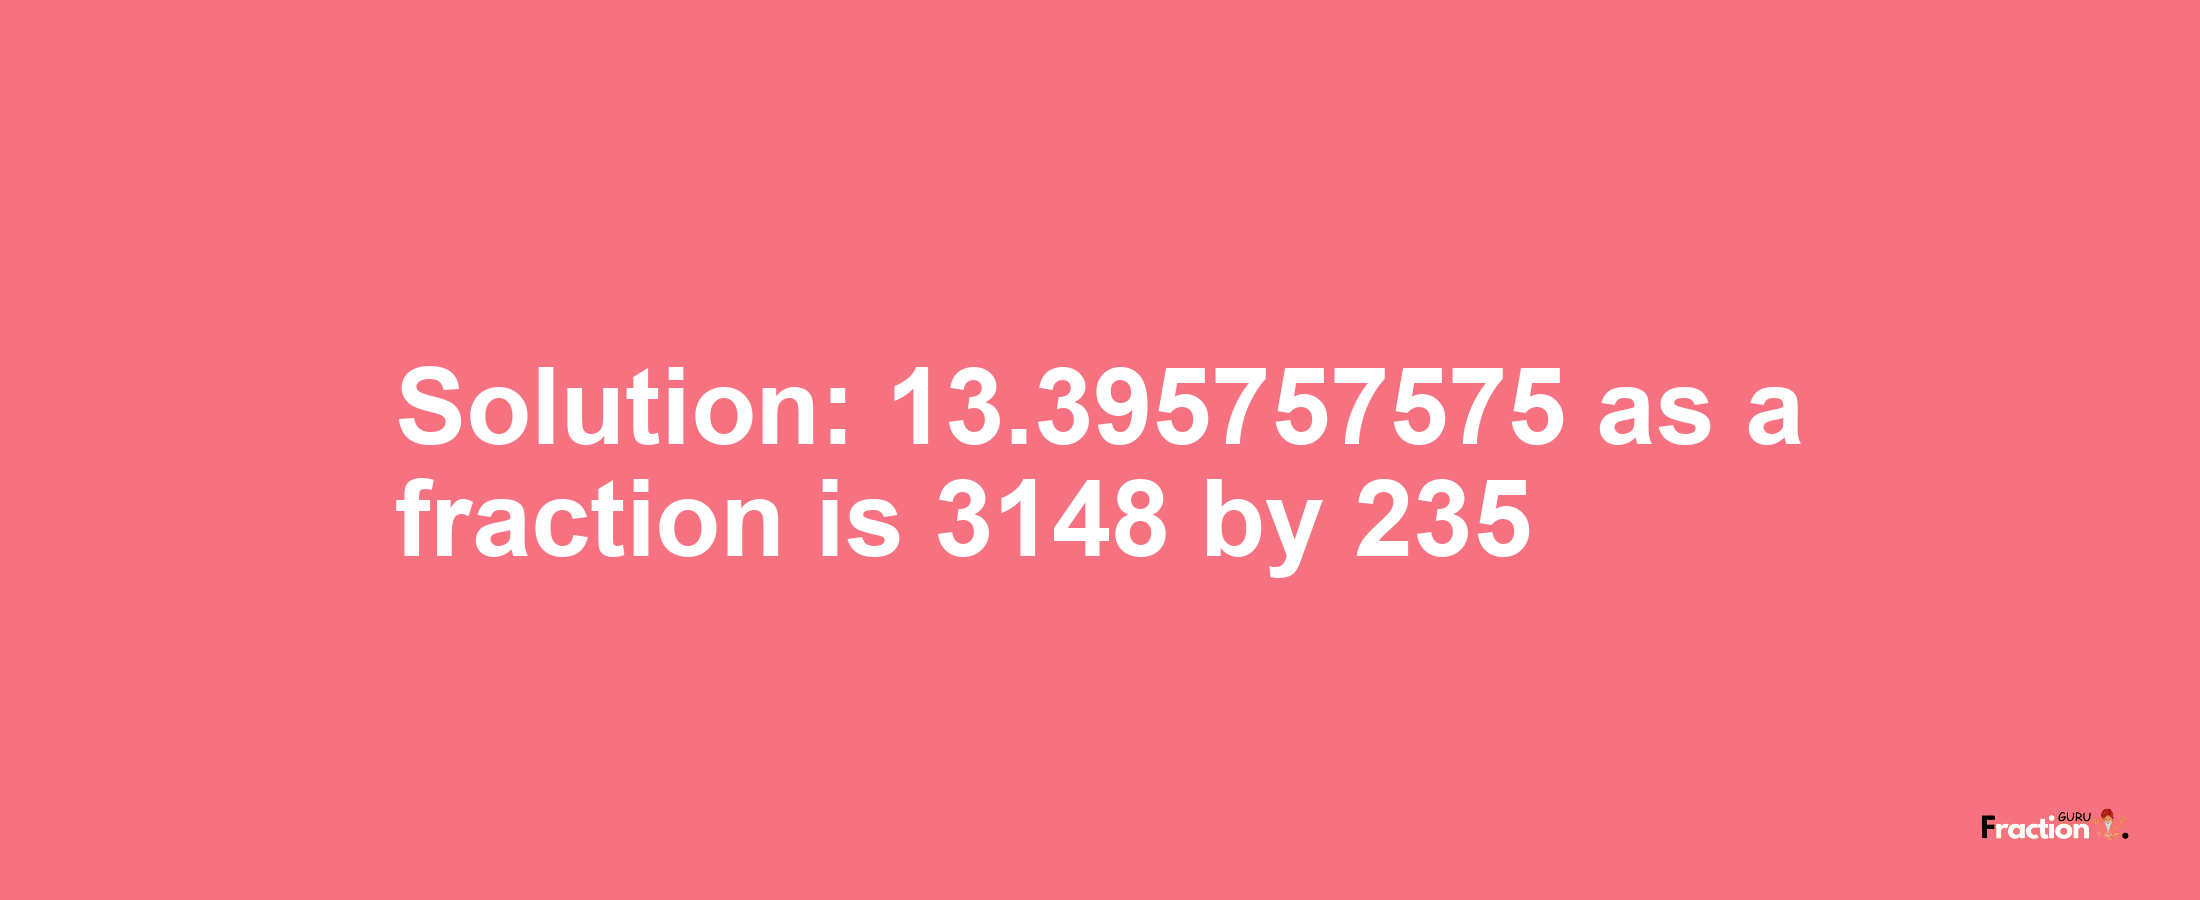 Solution:13.395757575 as a fraction is 3148/235